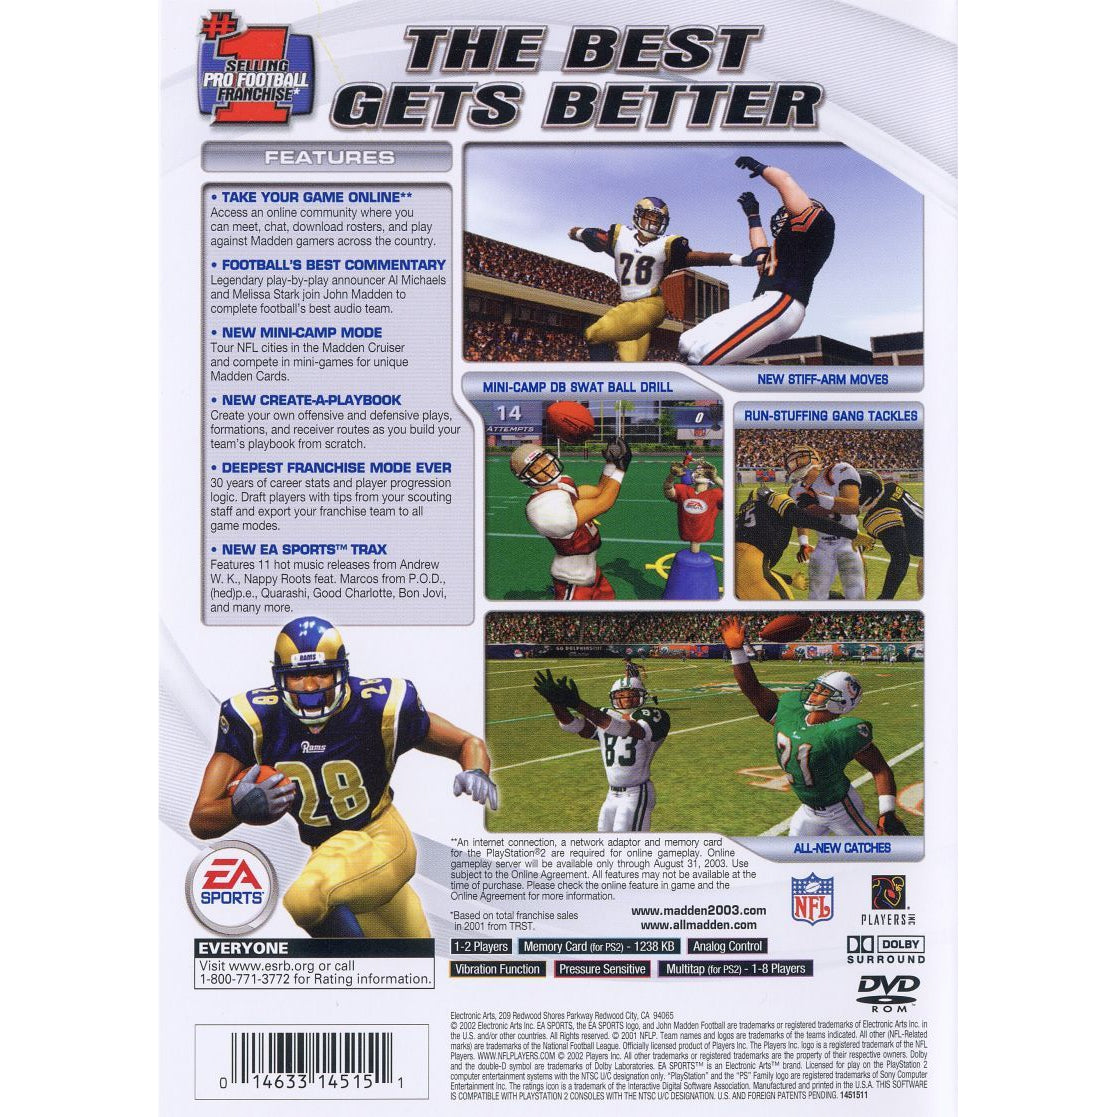 Madden NFL 2003 - PlayStation 2 (PS2) Game Complete - YourGamingShop.com - Buy, Sell, Trade Video Games Online. 120 Day Warranty. Satisfaction Guaranteed.